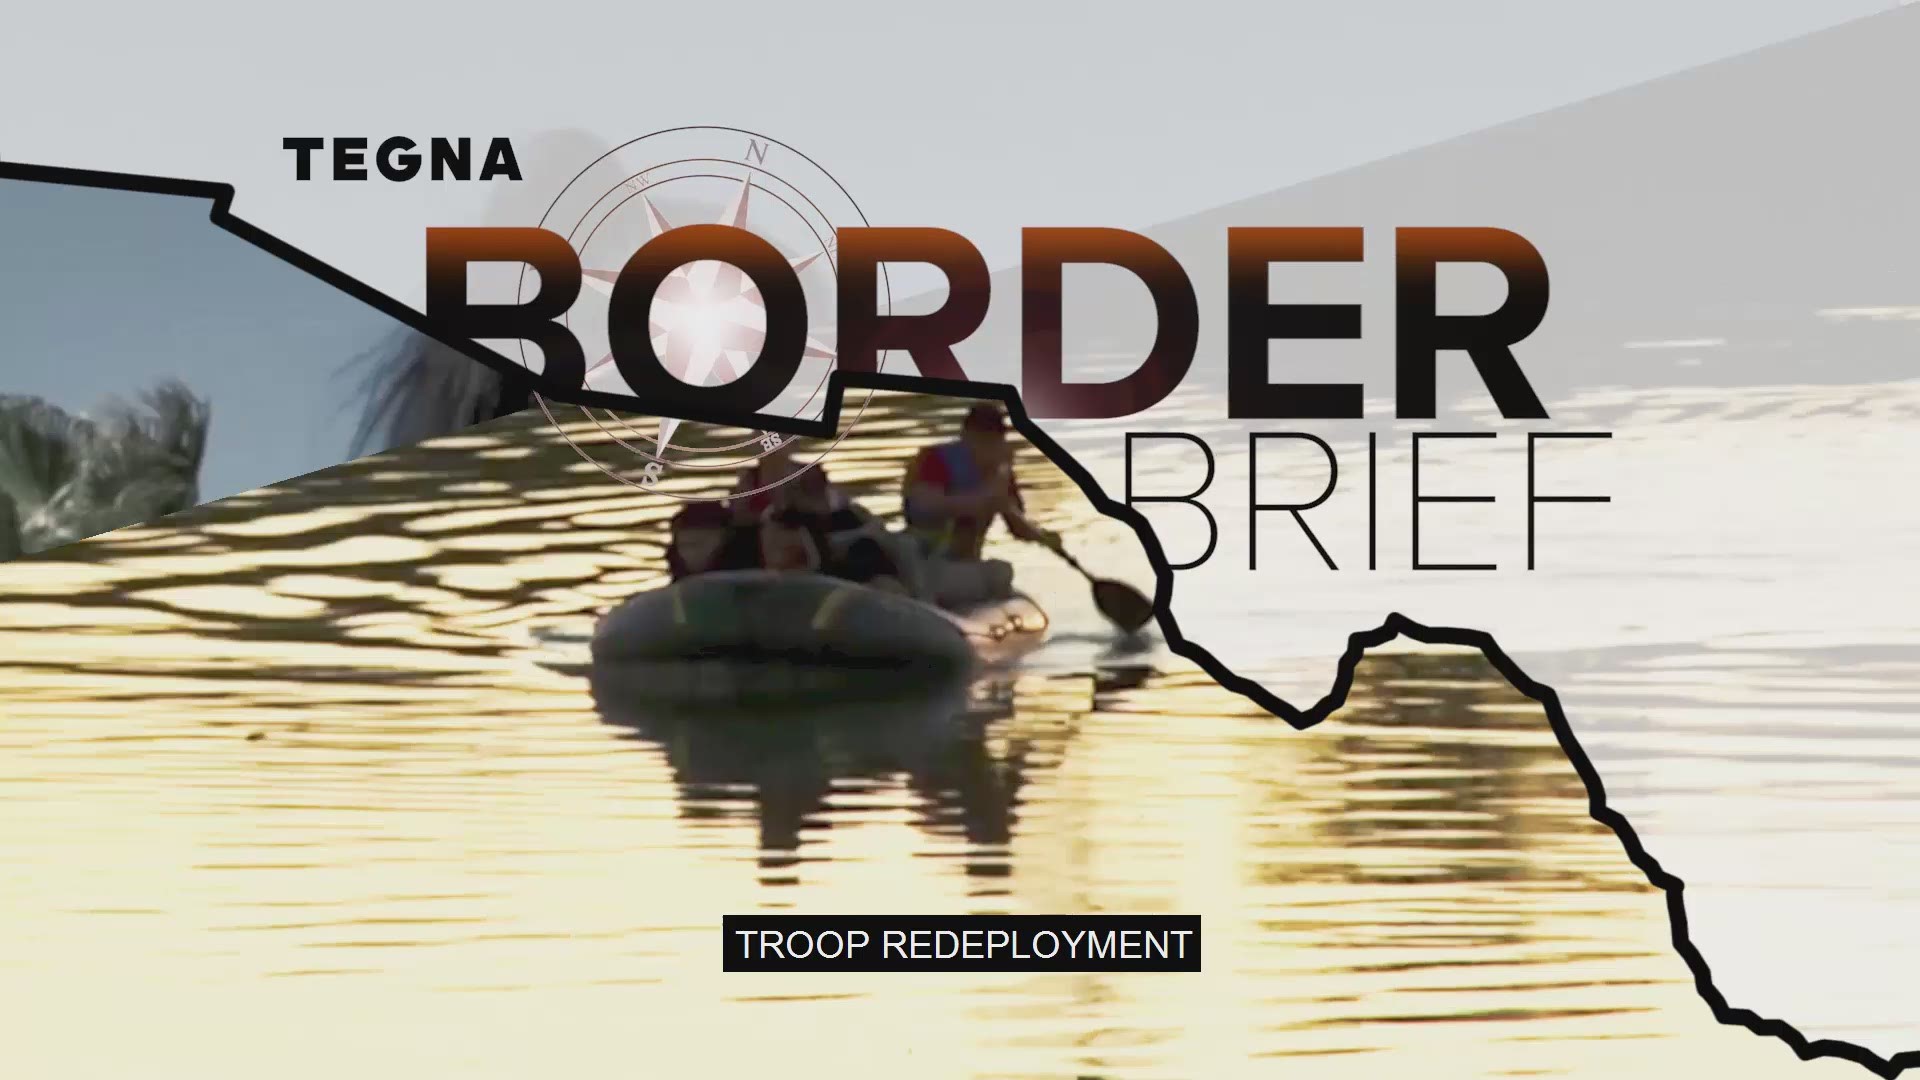 Approximately 2,300 soldiers were deployed to the border last November.